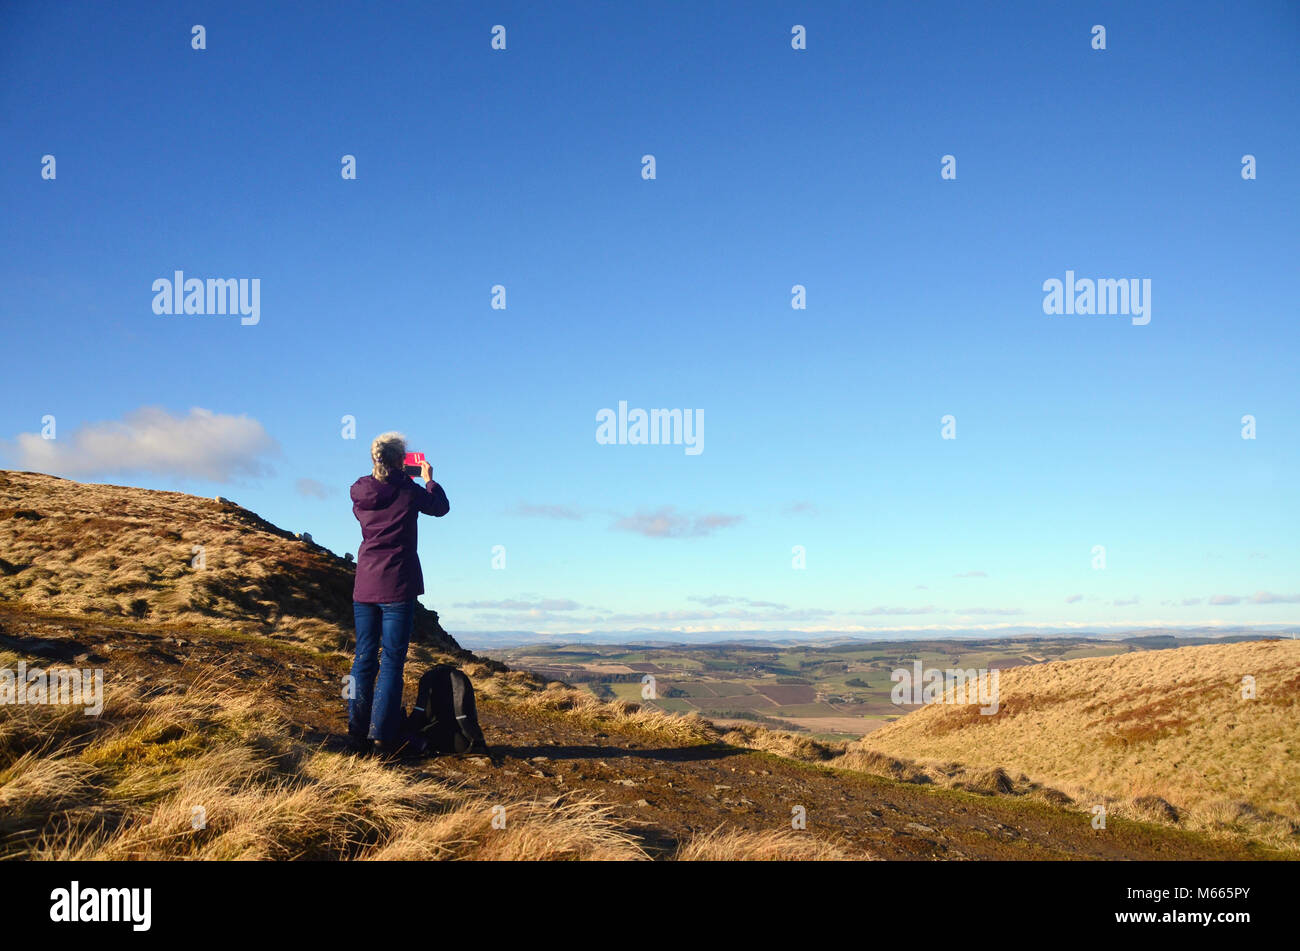 A woman takes a photo from the Lomond hills in Fife, of the snowy peaks of the cairngorms seen in the distance. Stock Photo